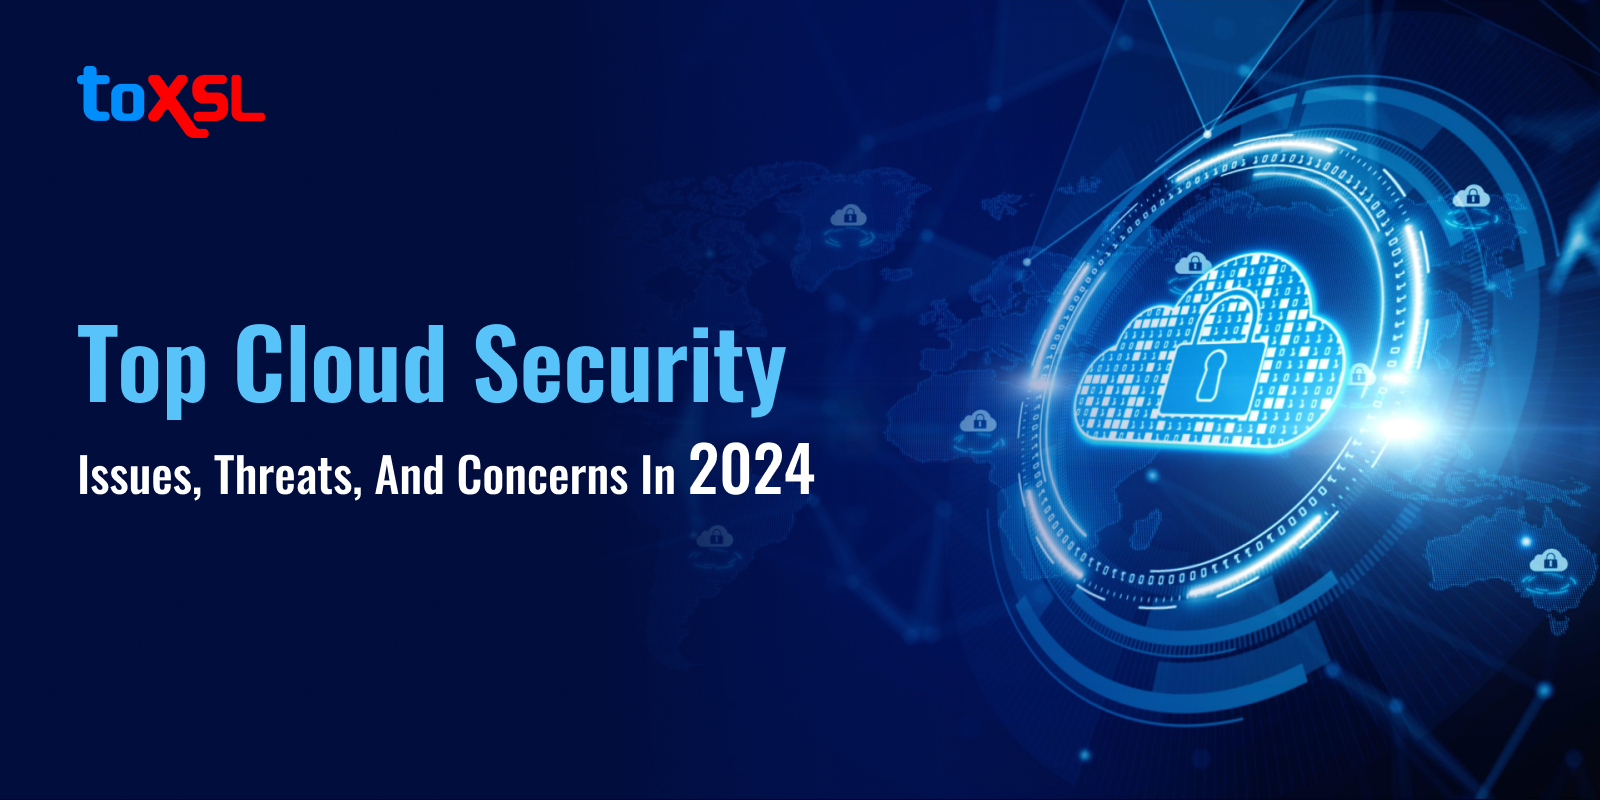 Top Cloud Security Issues, Threats, And Concerns In 2024